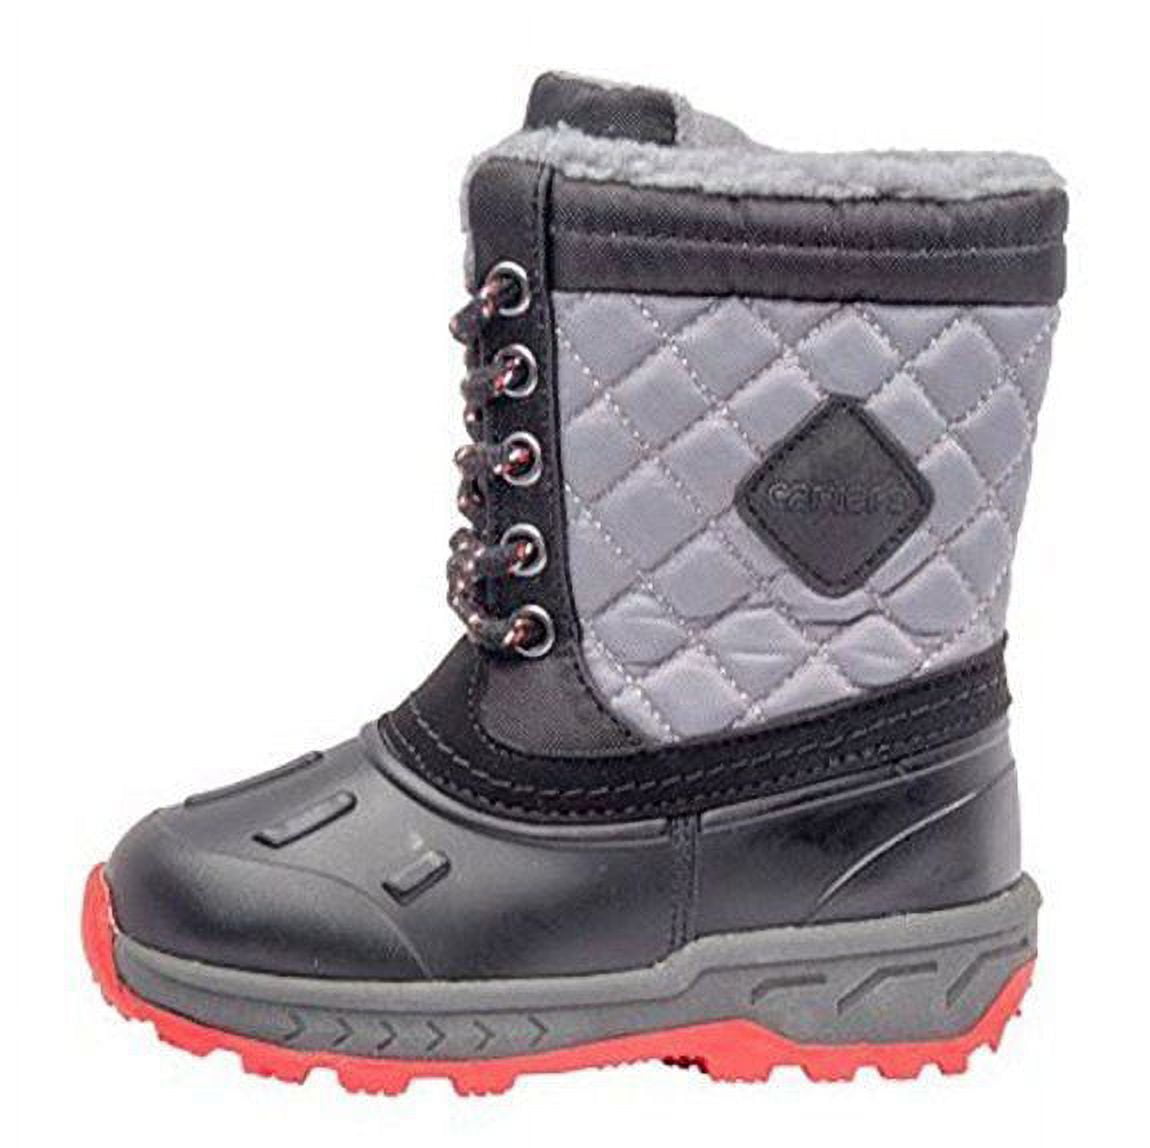 Carter's Toddler Boy's Aikin Boy's Cold Weather Snow Boot SIZE 6